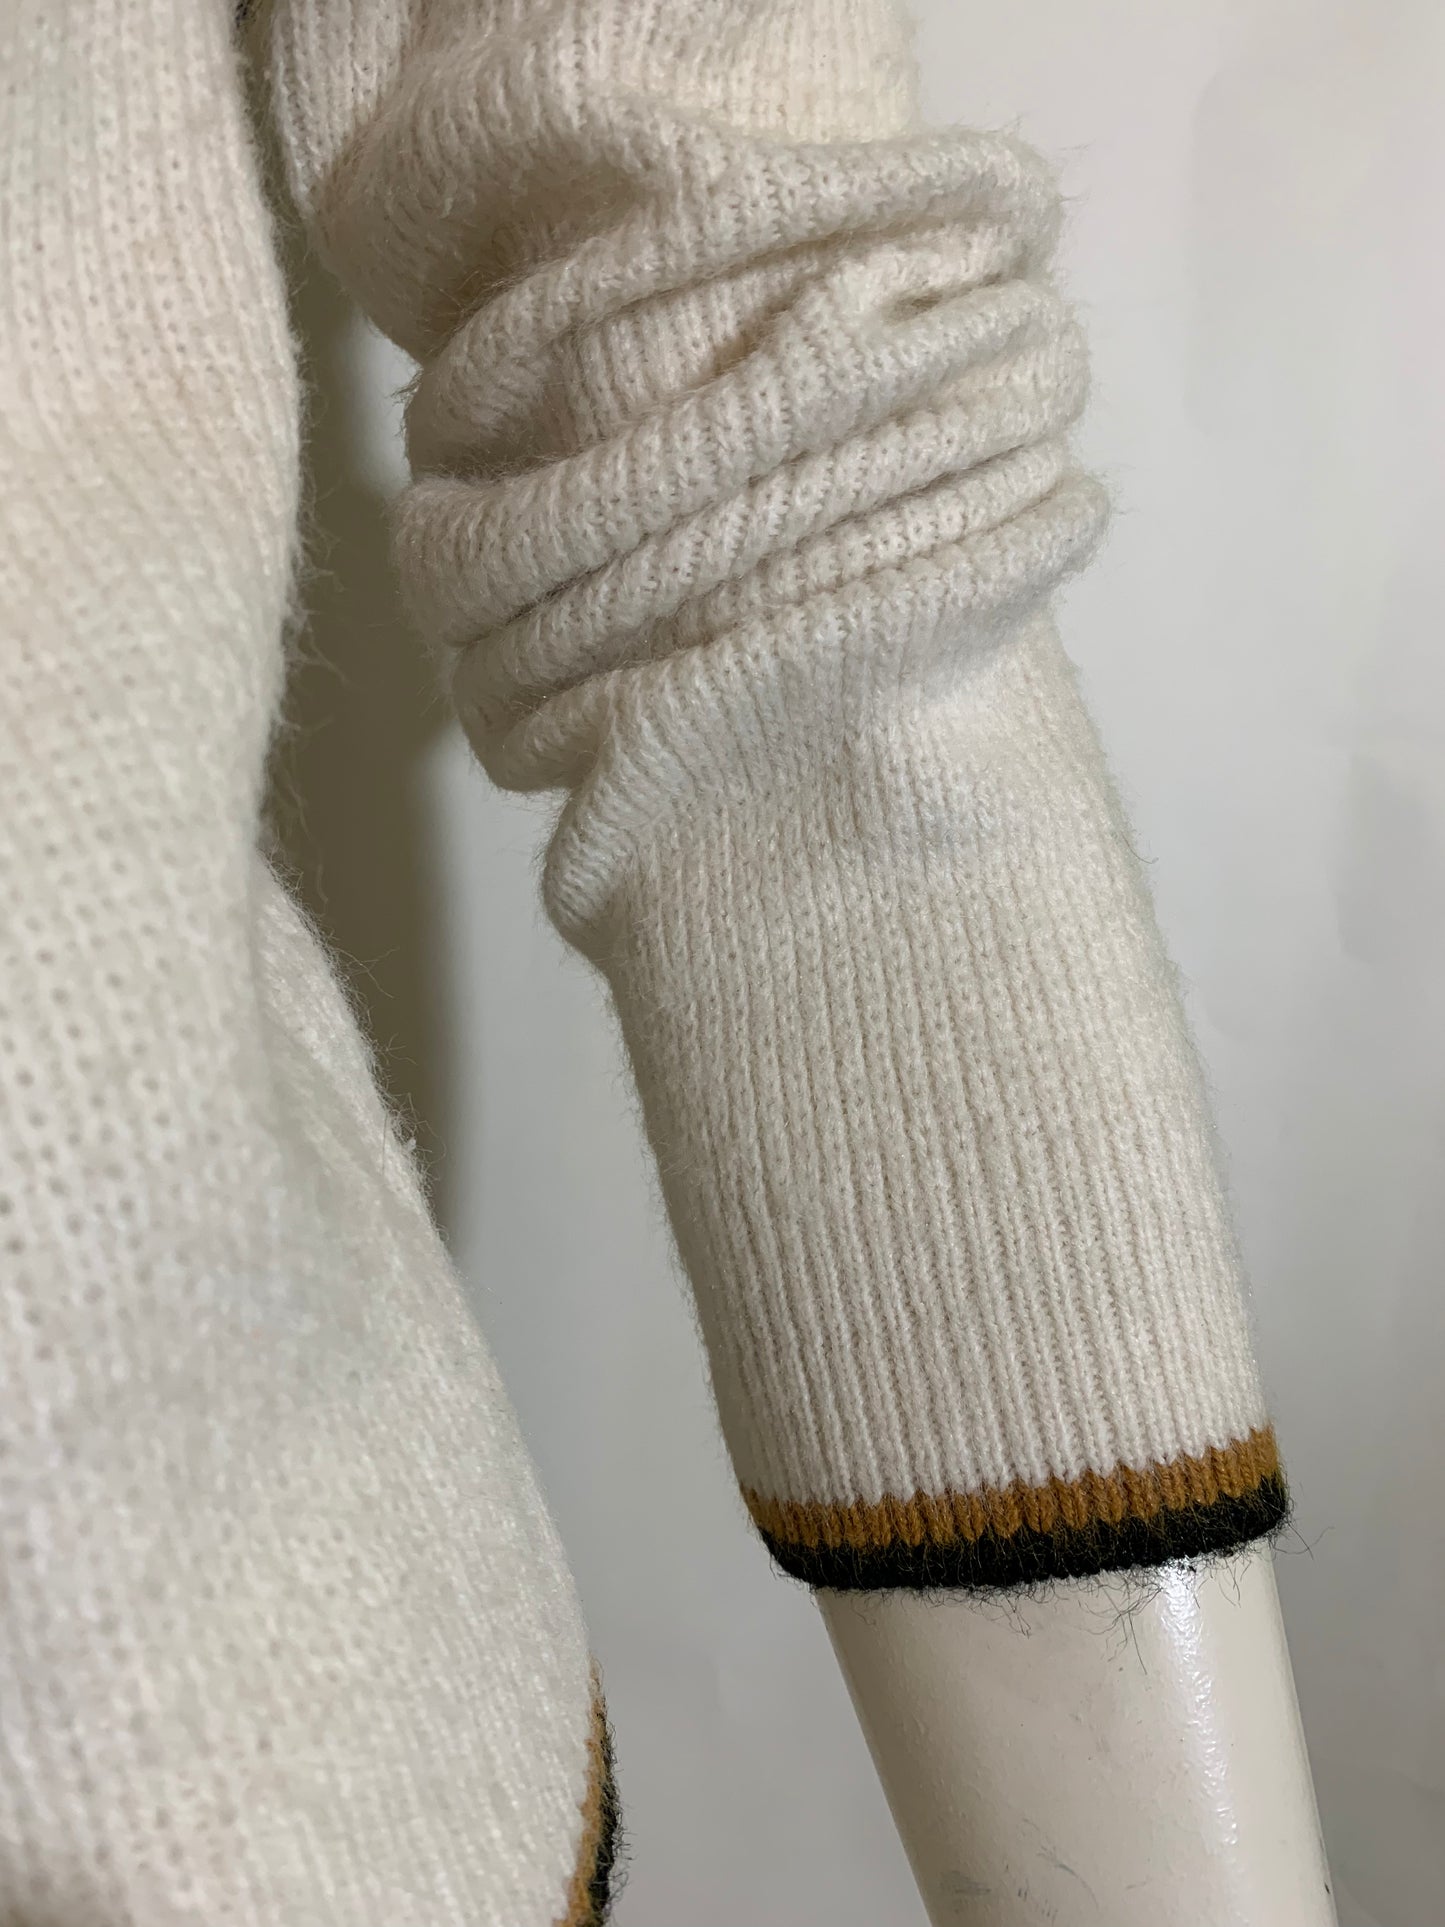 Blue and Gold Acrylic Zip Front Sweater circa 1960s